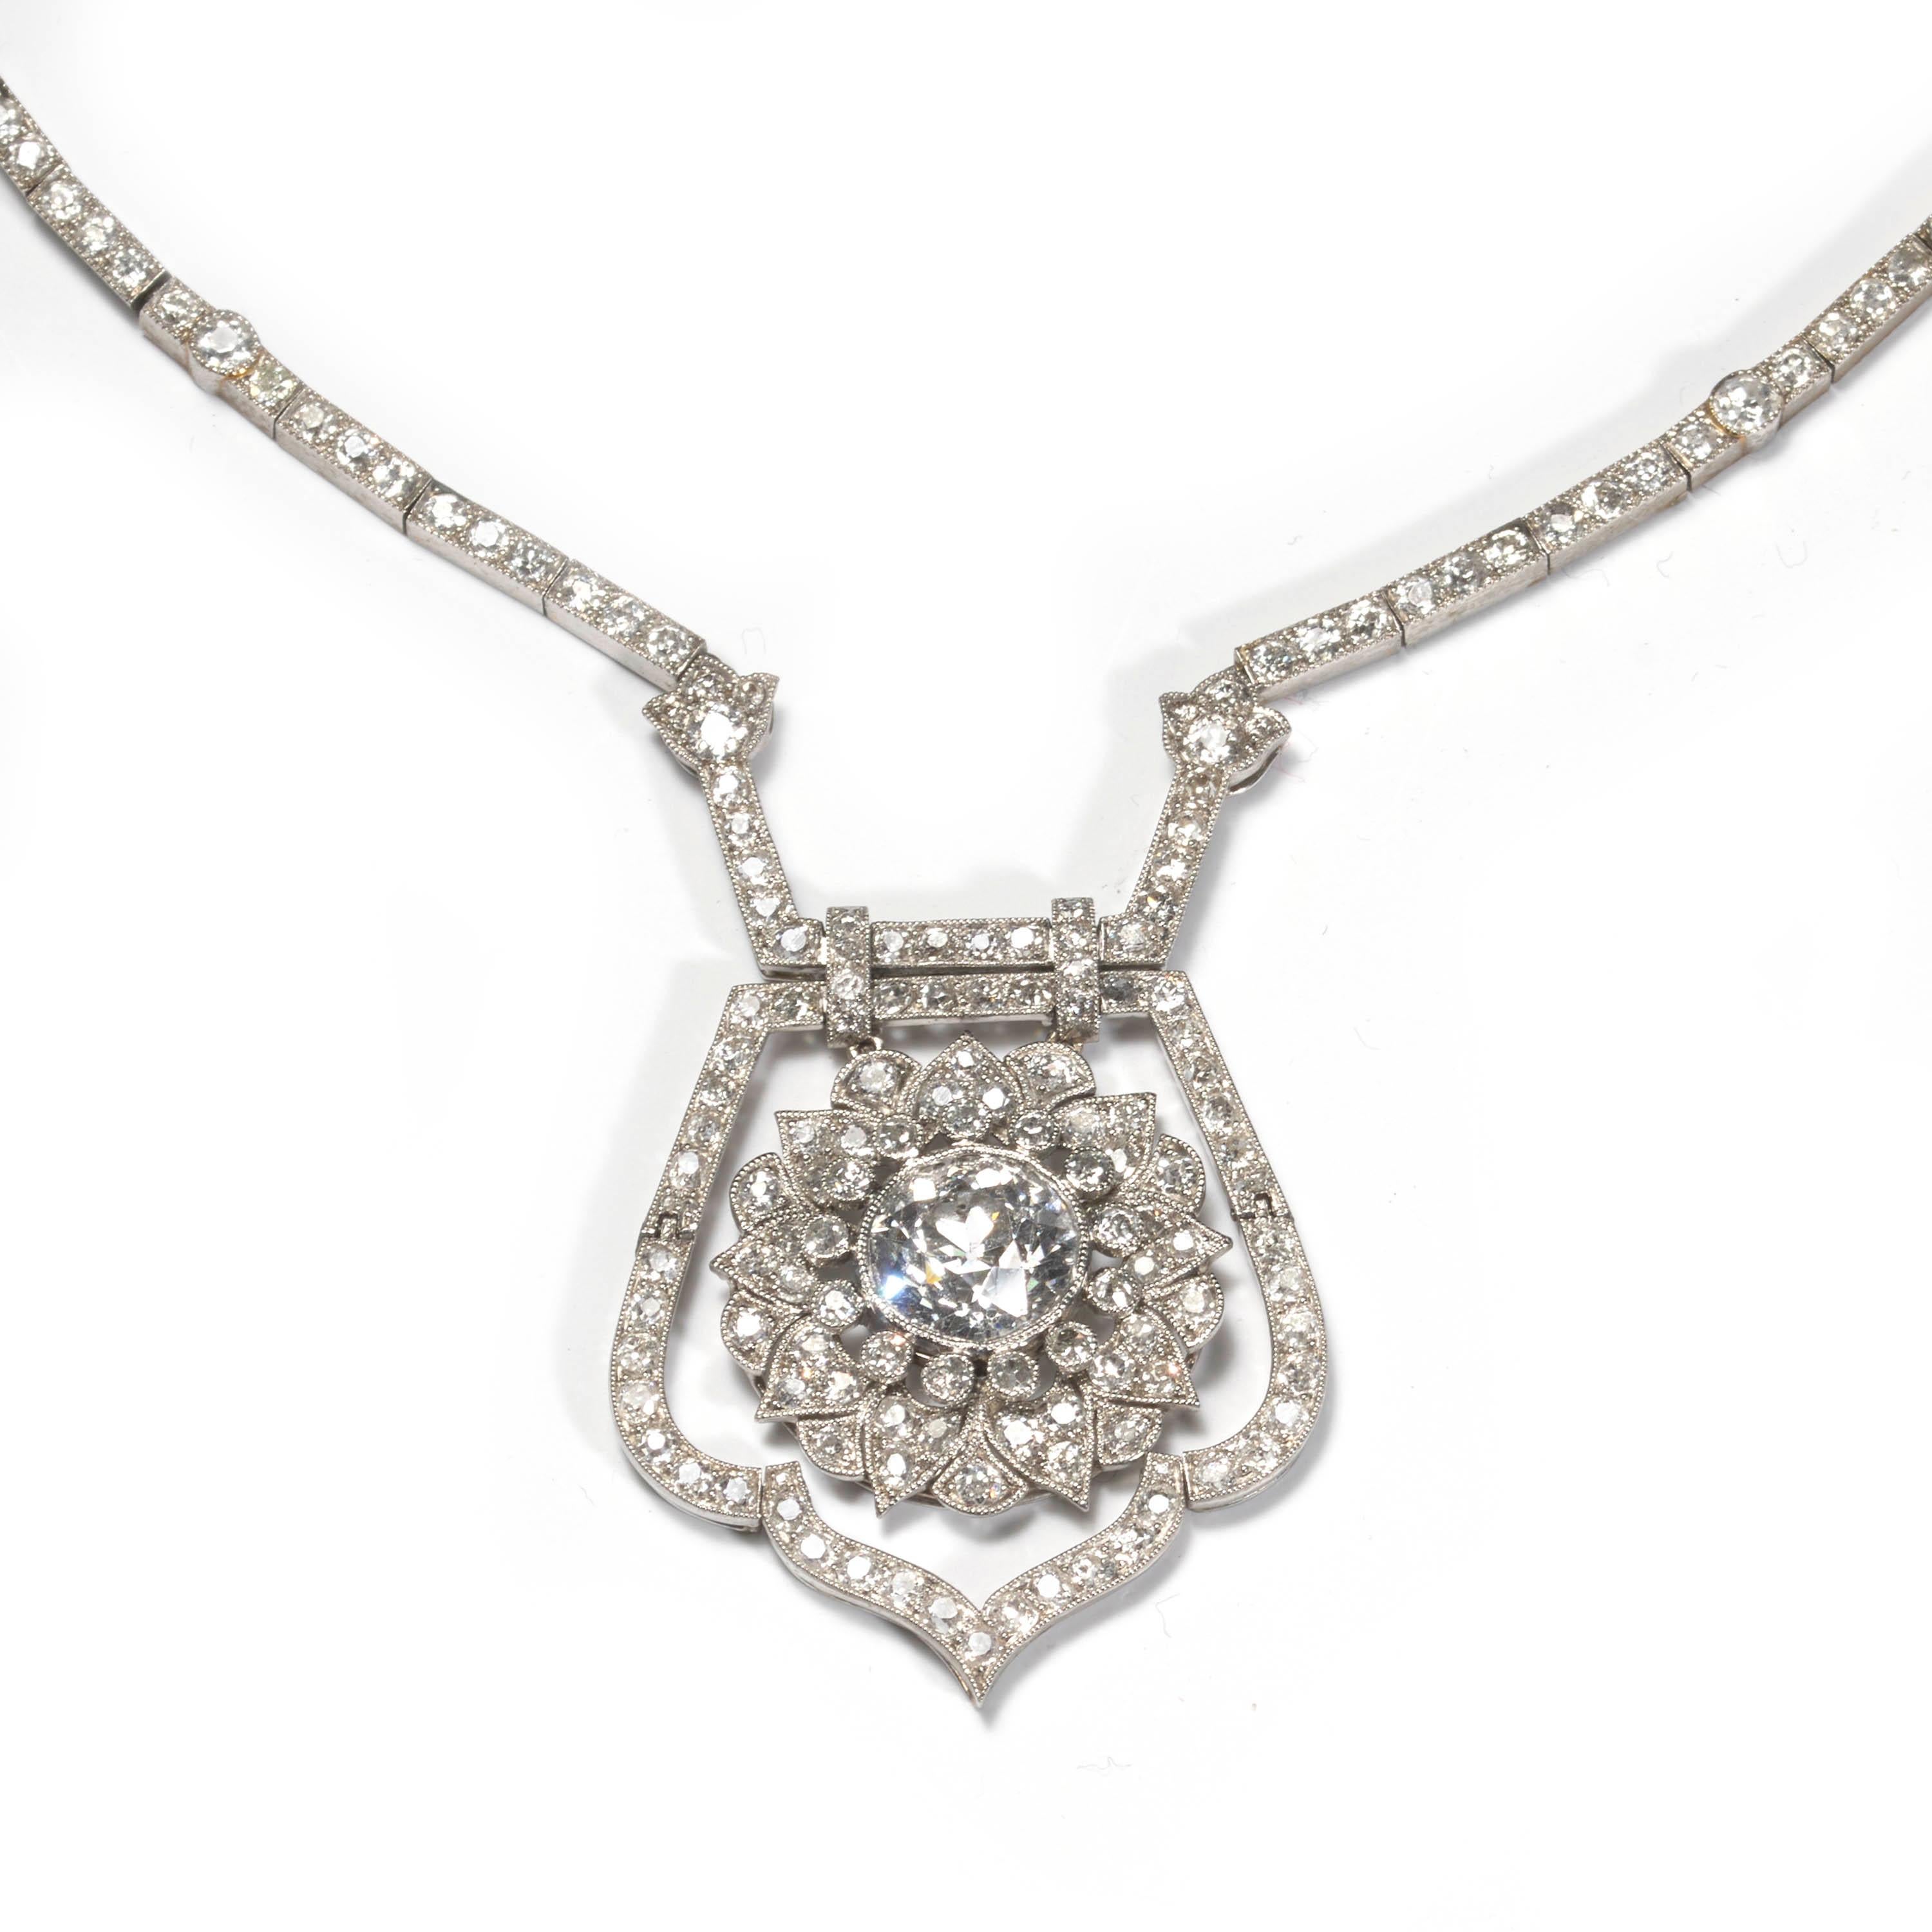 An Art Deco diamond necklace, designed as an old-cut diamond weighing an estimated 3.75ct, set in the centre of a floral cluster motif and suspended within an articulated old-cut diamond surround, further suspended from an integrated pavé set